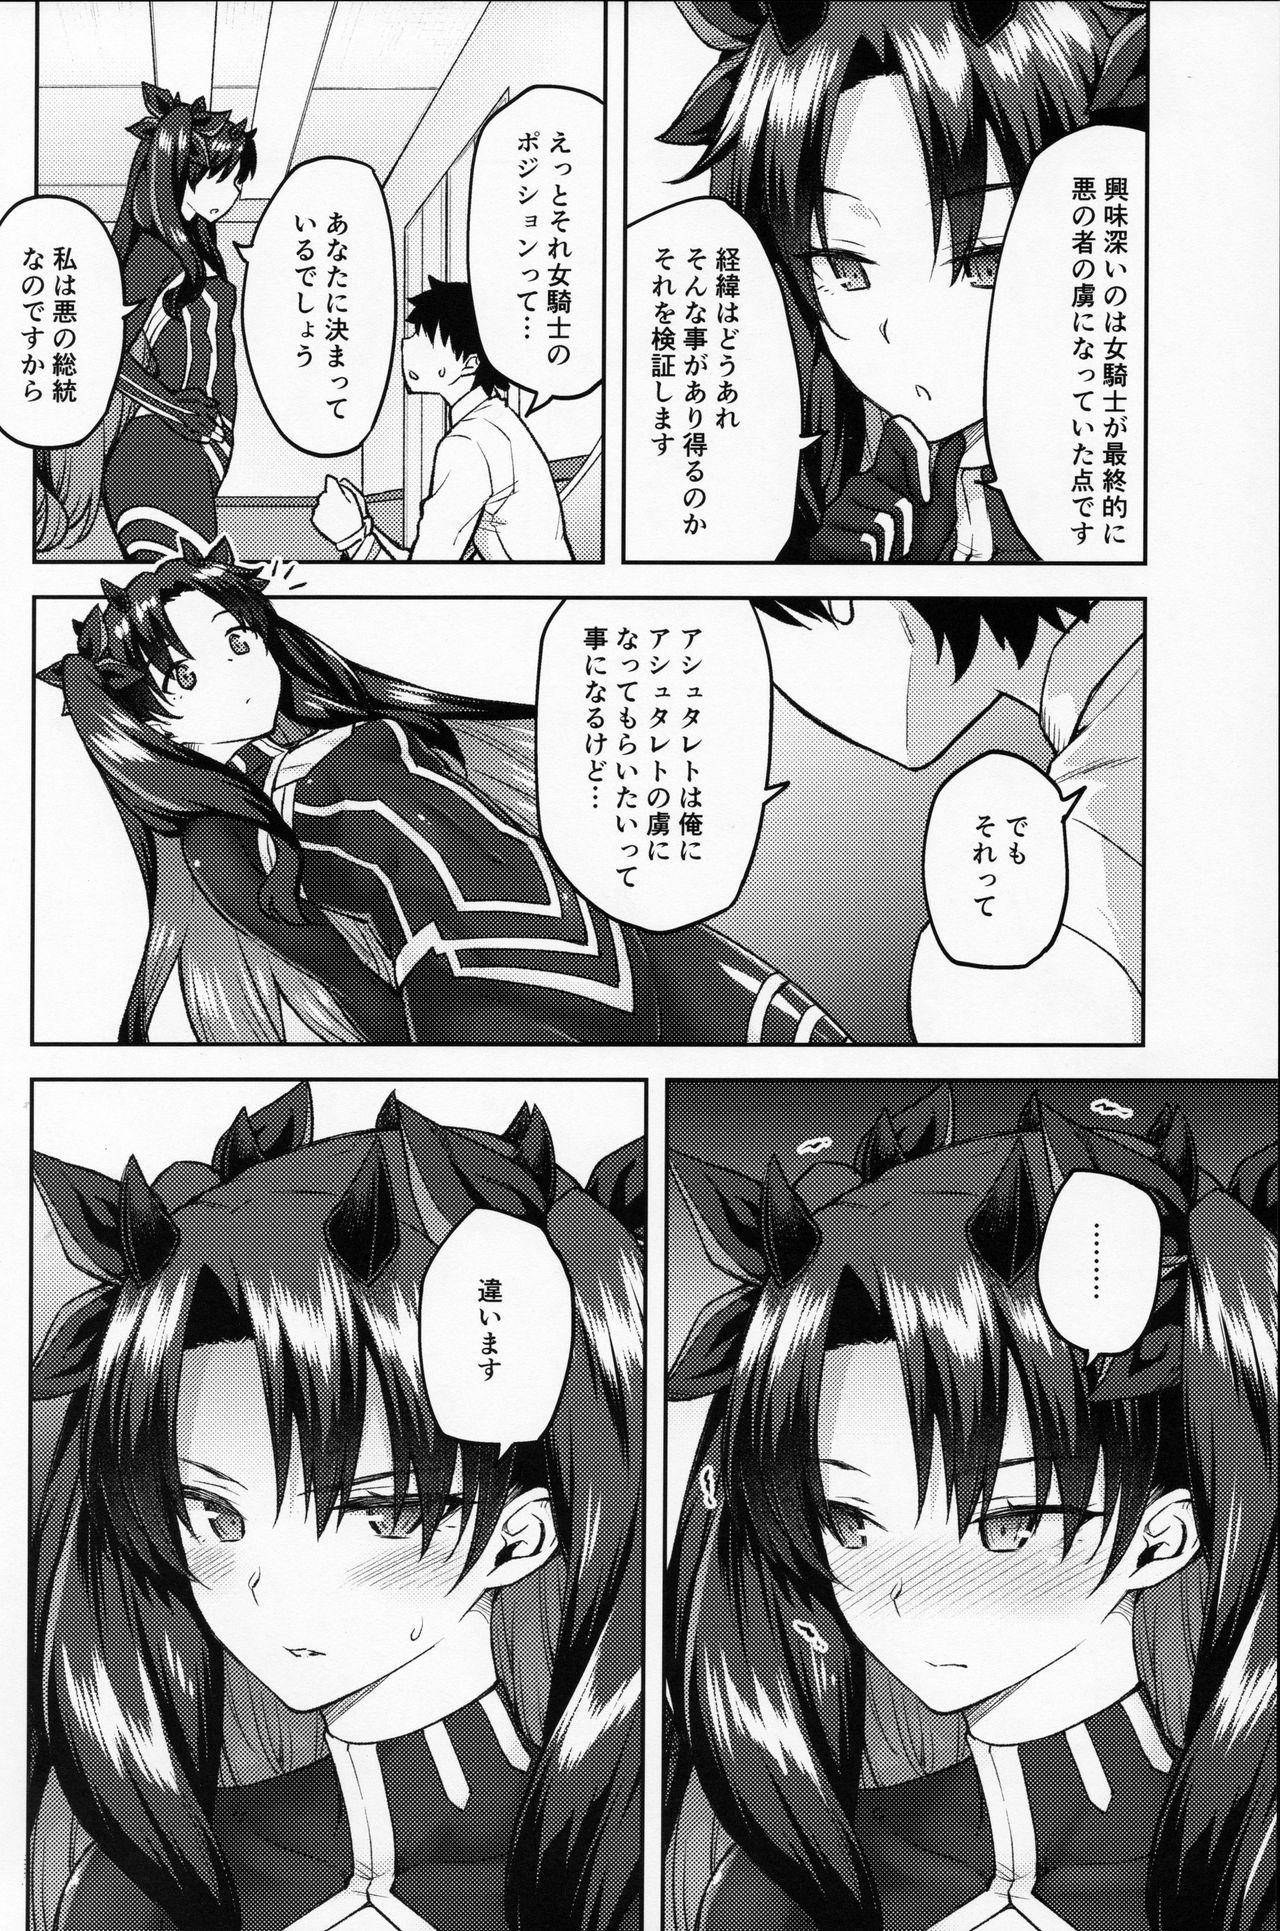 Groupsex Chaldea Life V - Fate grand order Licking Pussy - Page 3